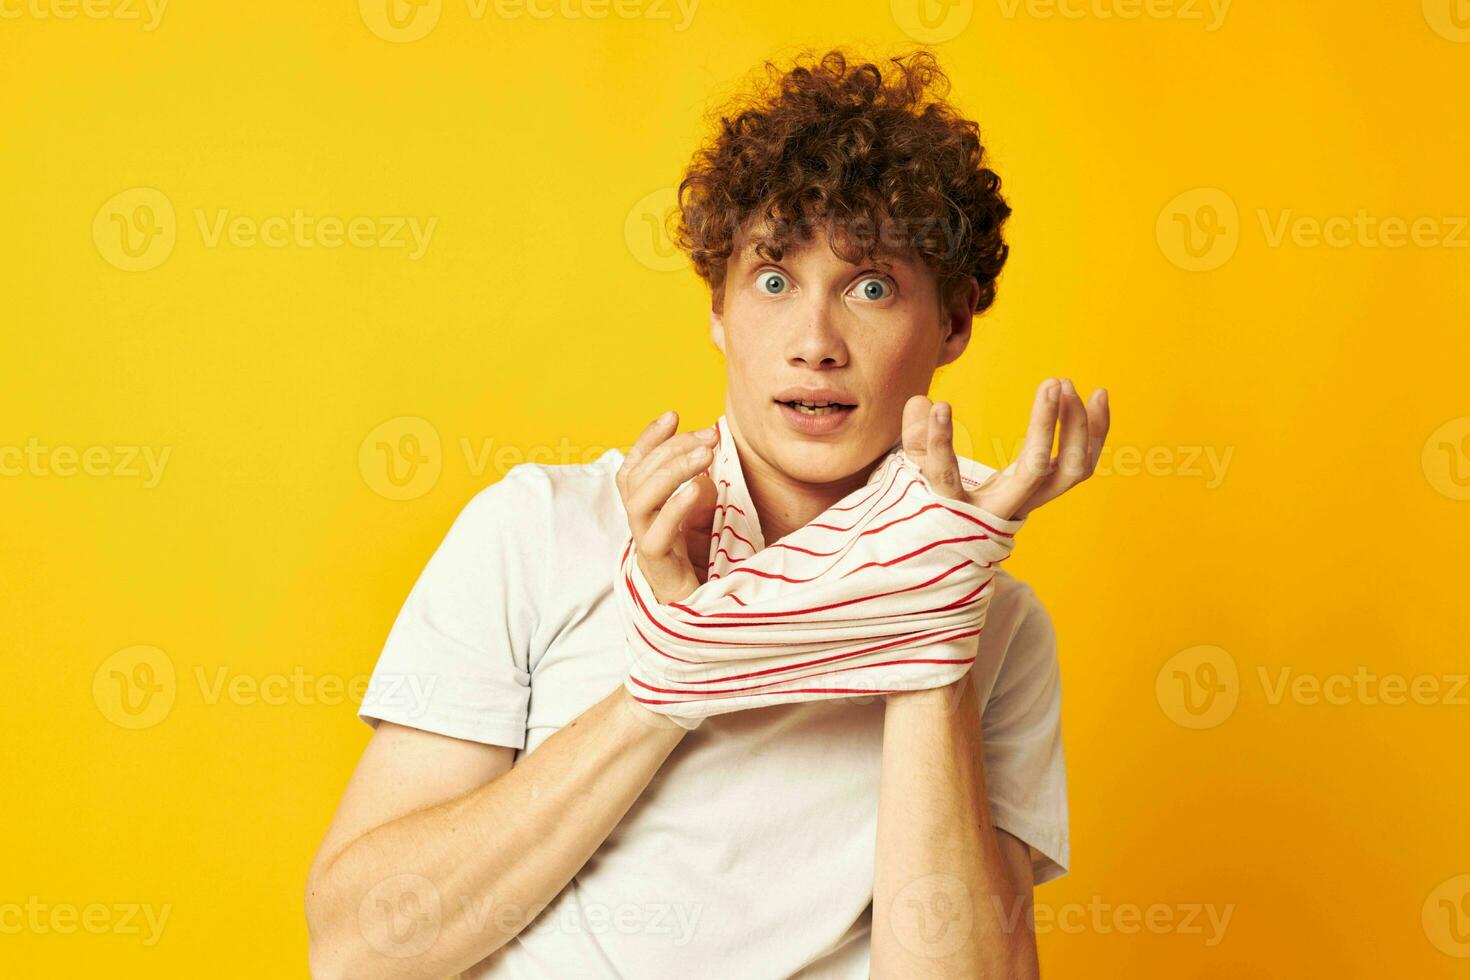 cute red-haired guy striped t shirt posing summer clothing isolated background unaltered photo